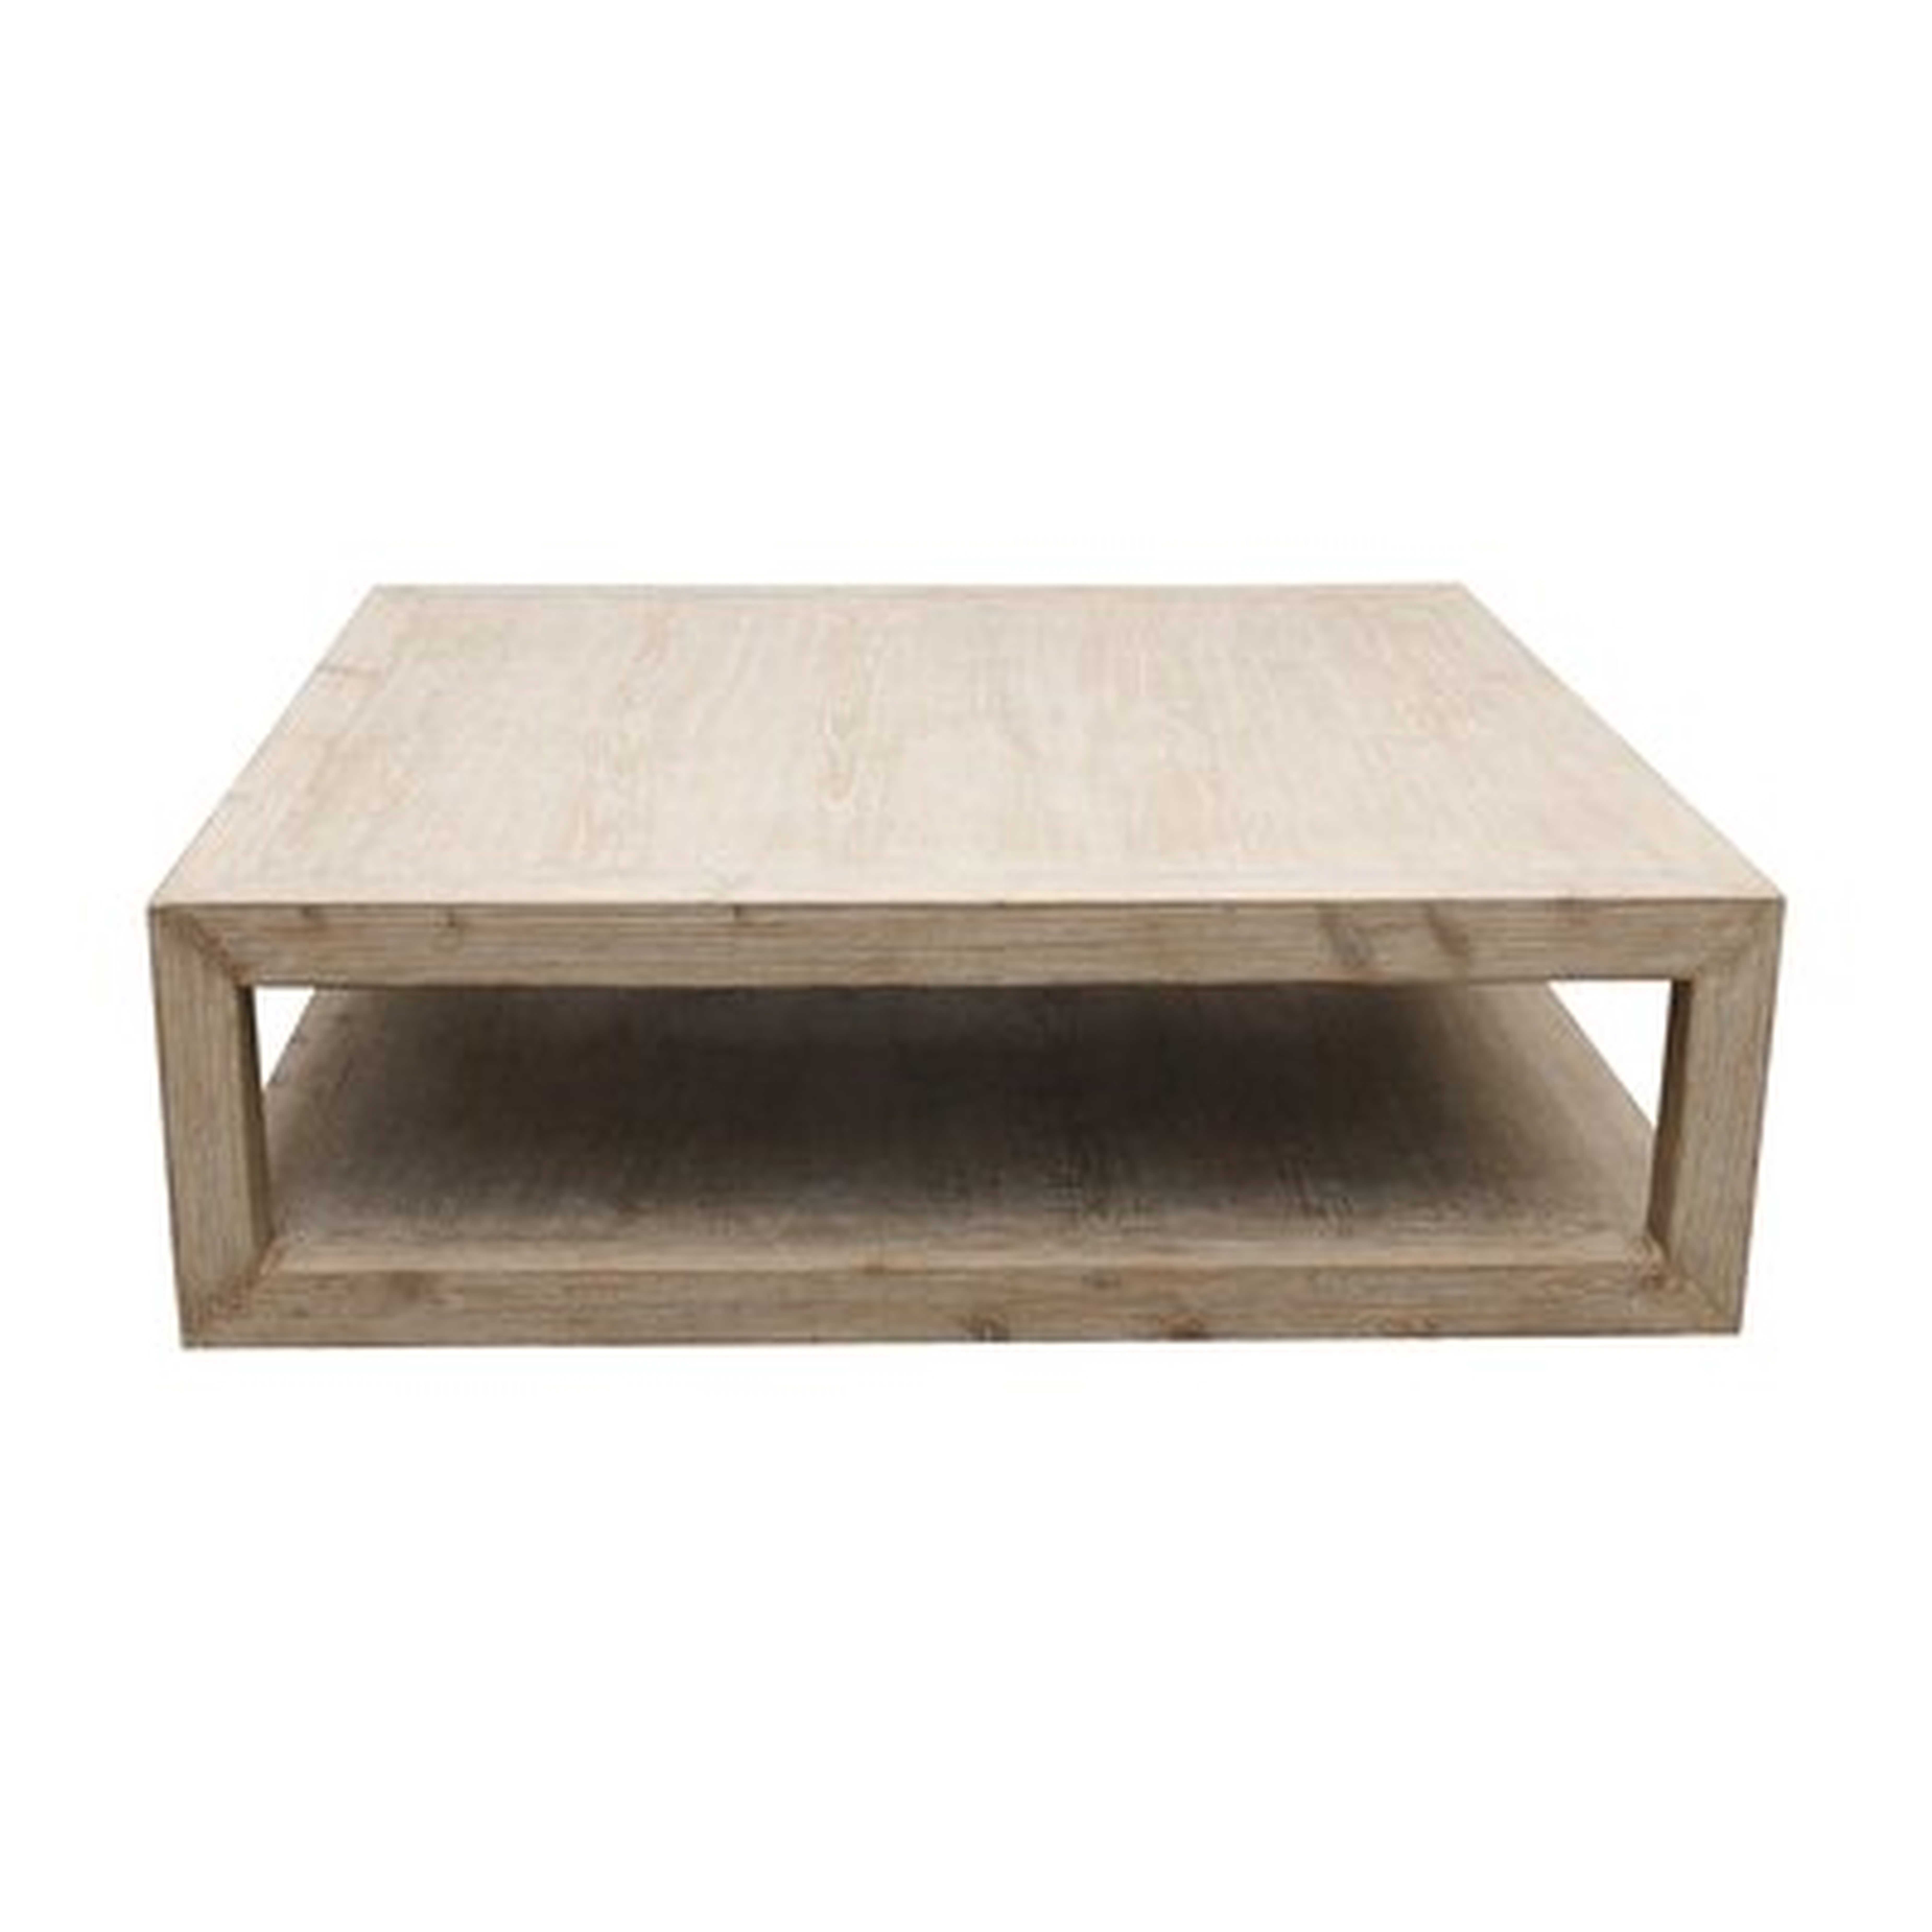 Lily's Living Versatile Peking Grand Framed Square Coffee Table With Weathered White Wash, 50 Inch Long - Wayfair